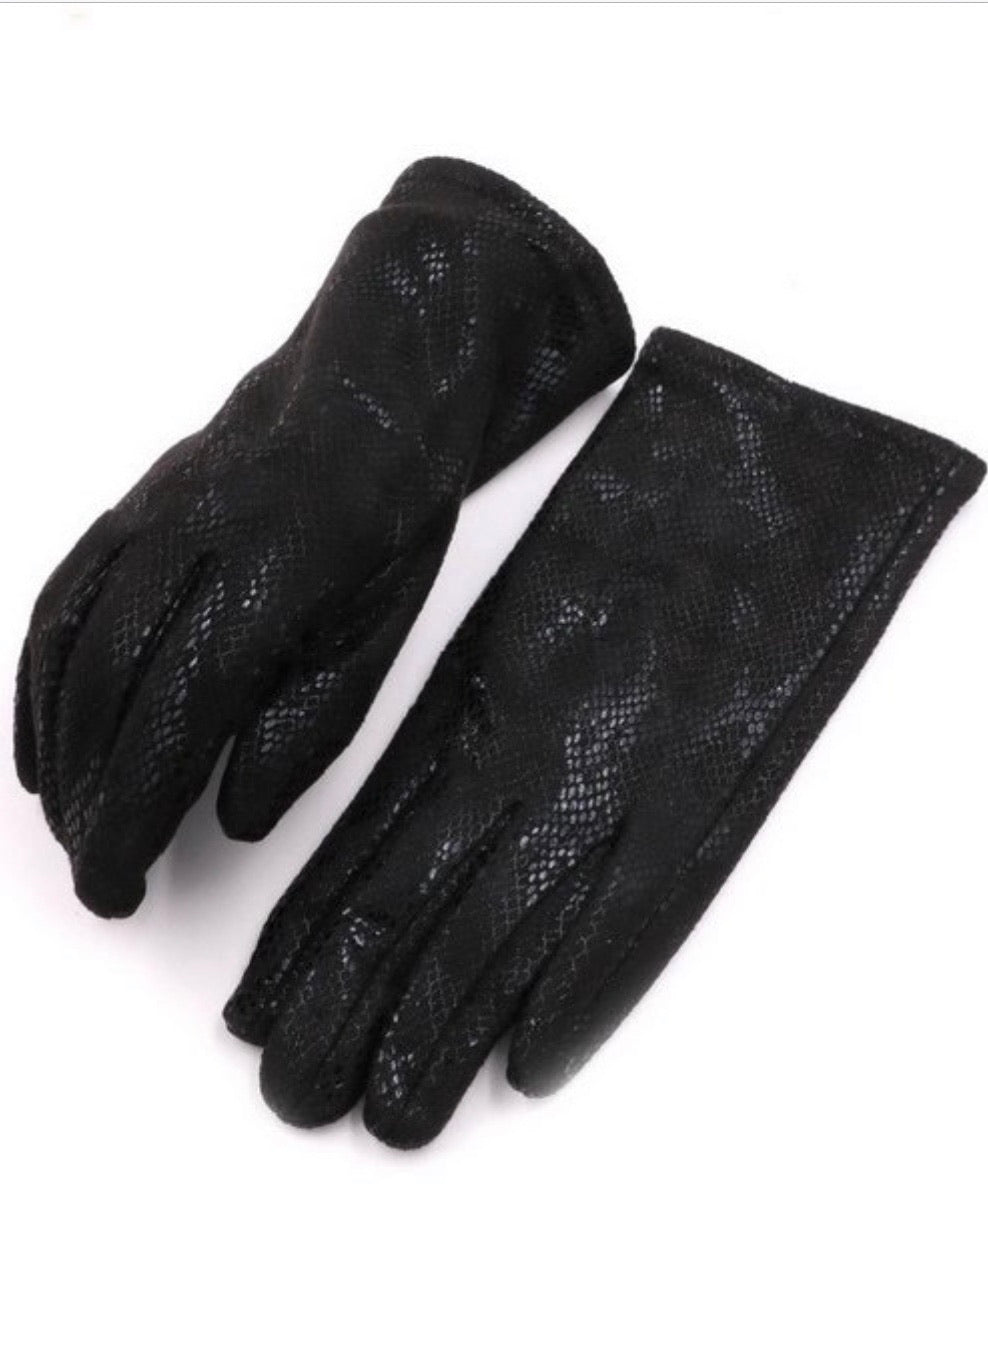 Black Snake Print Gloves - Corinne an Affordable Women's Clothing Boutique in the US USA